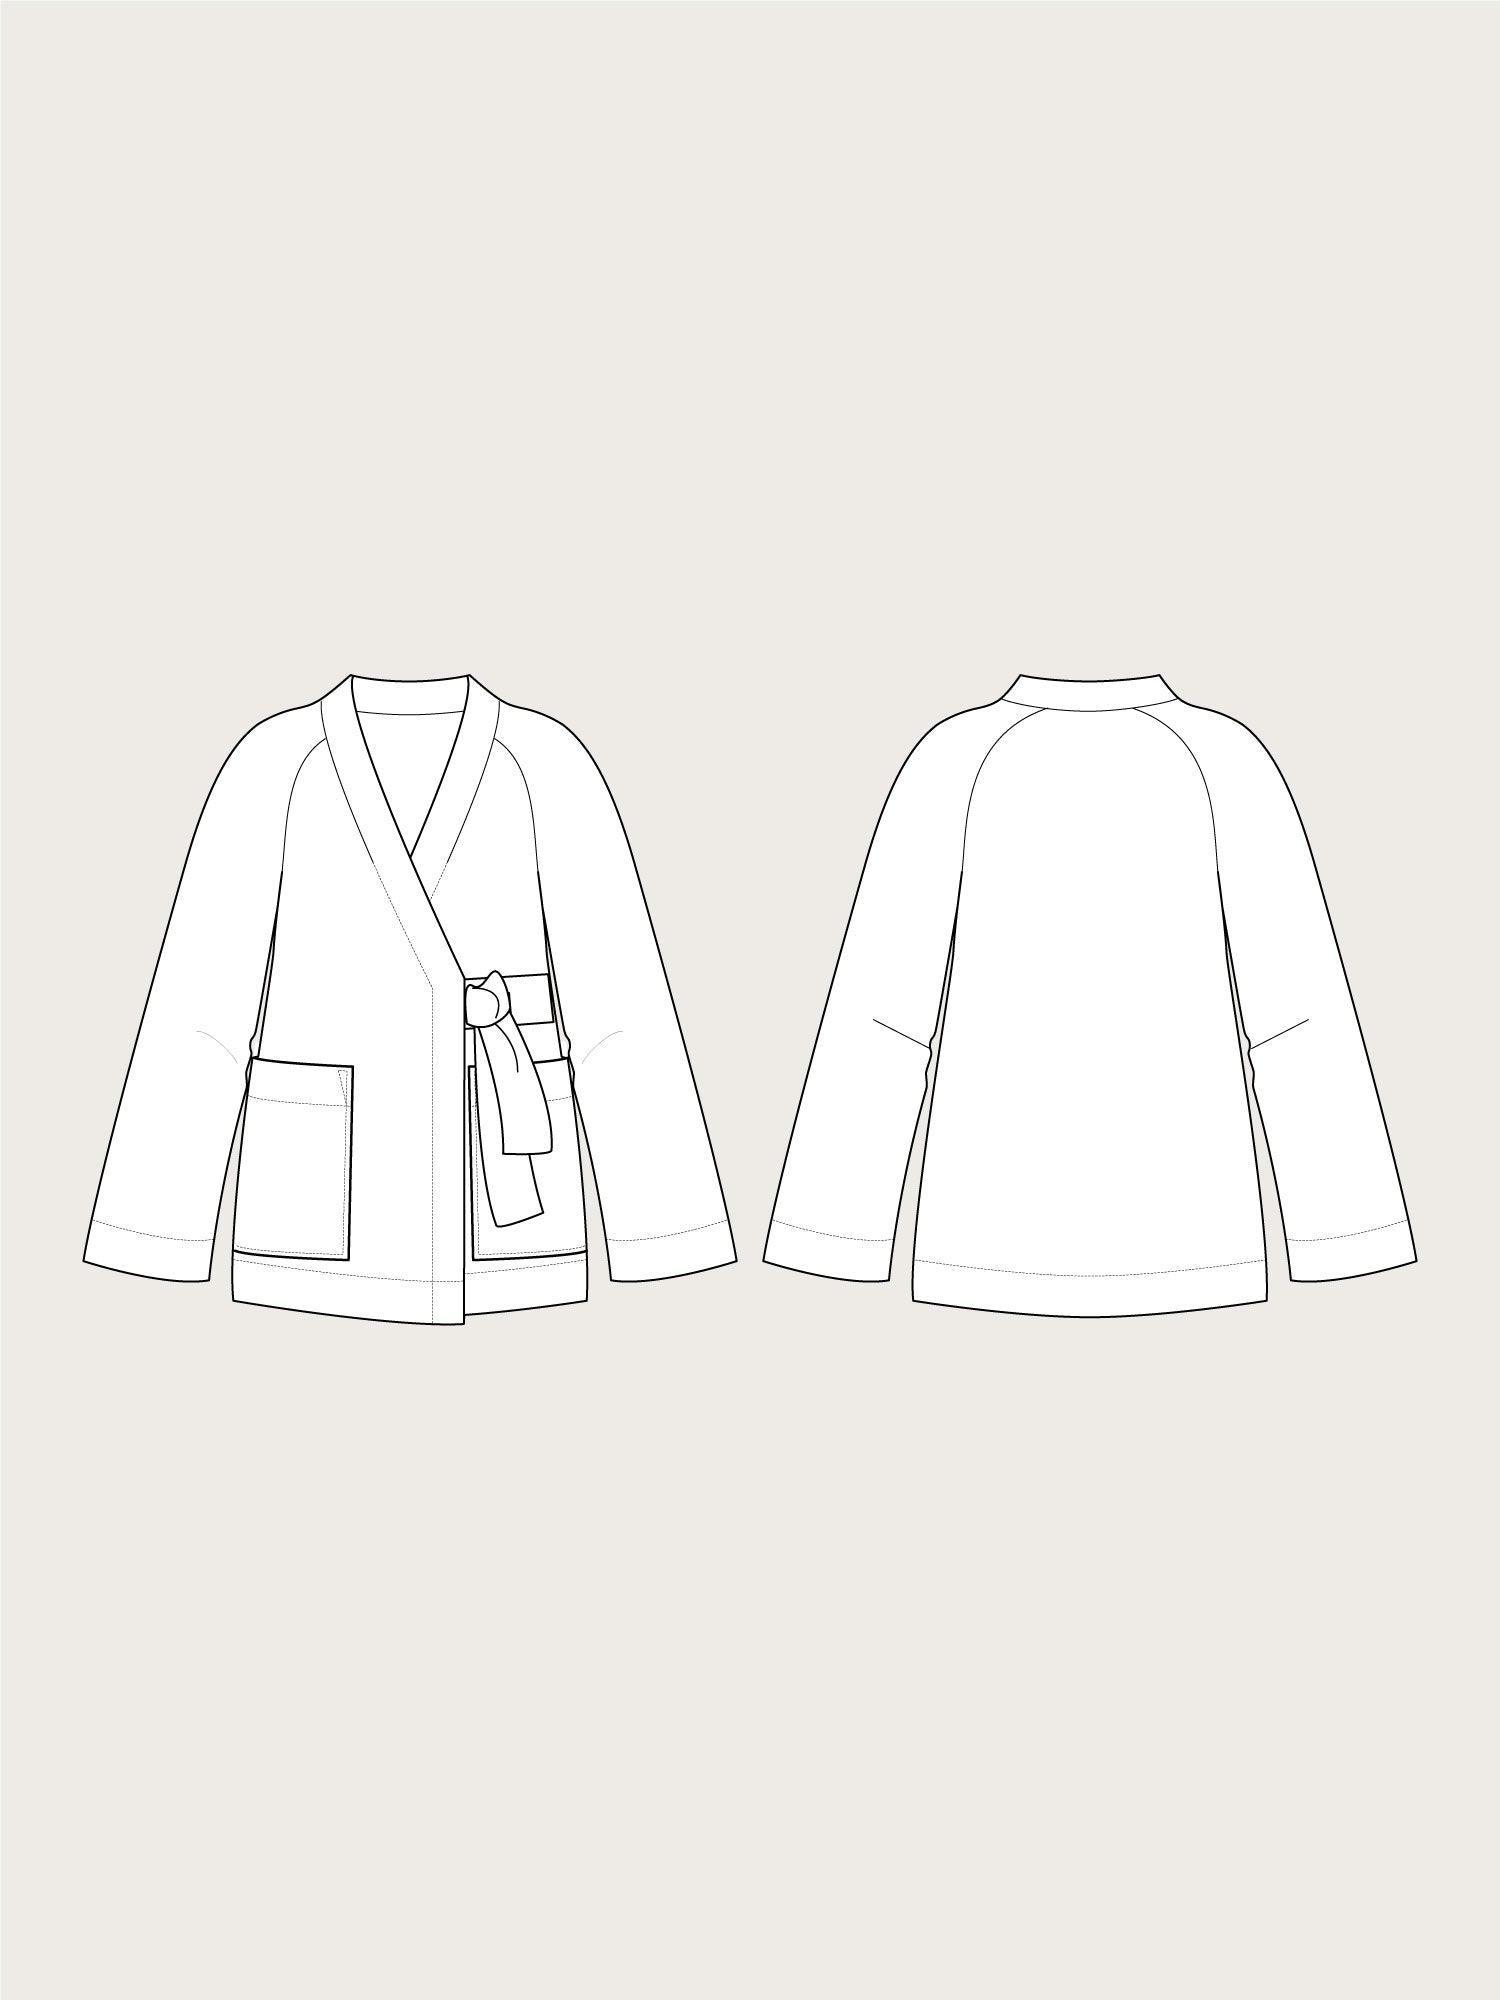 The Assembly Line Wrap Jacket | Harts Fabric